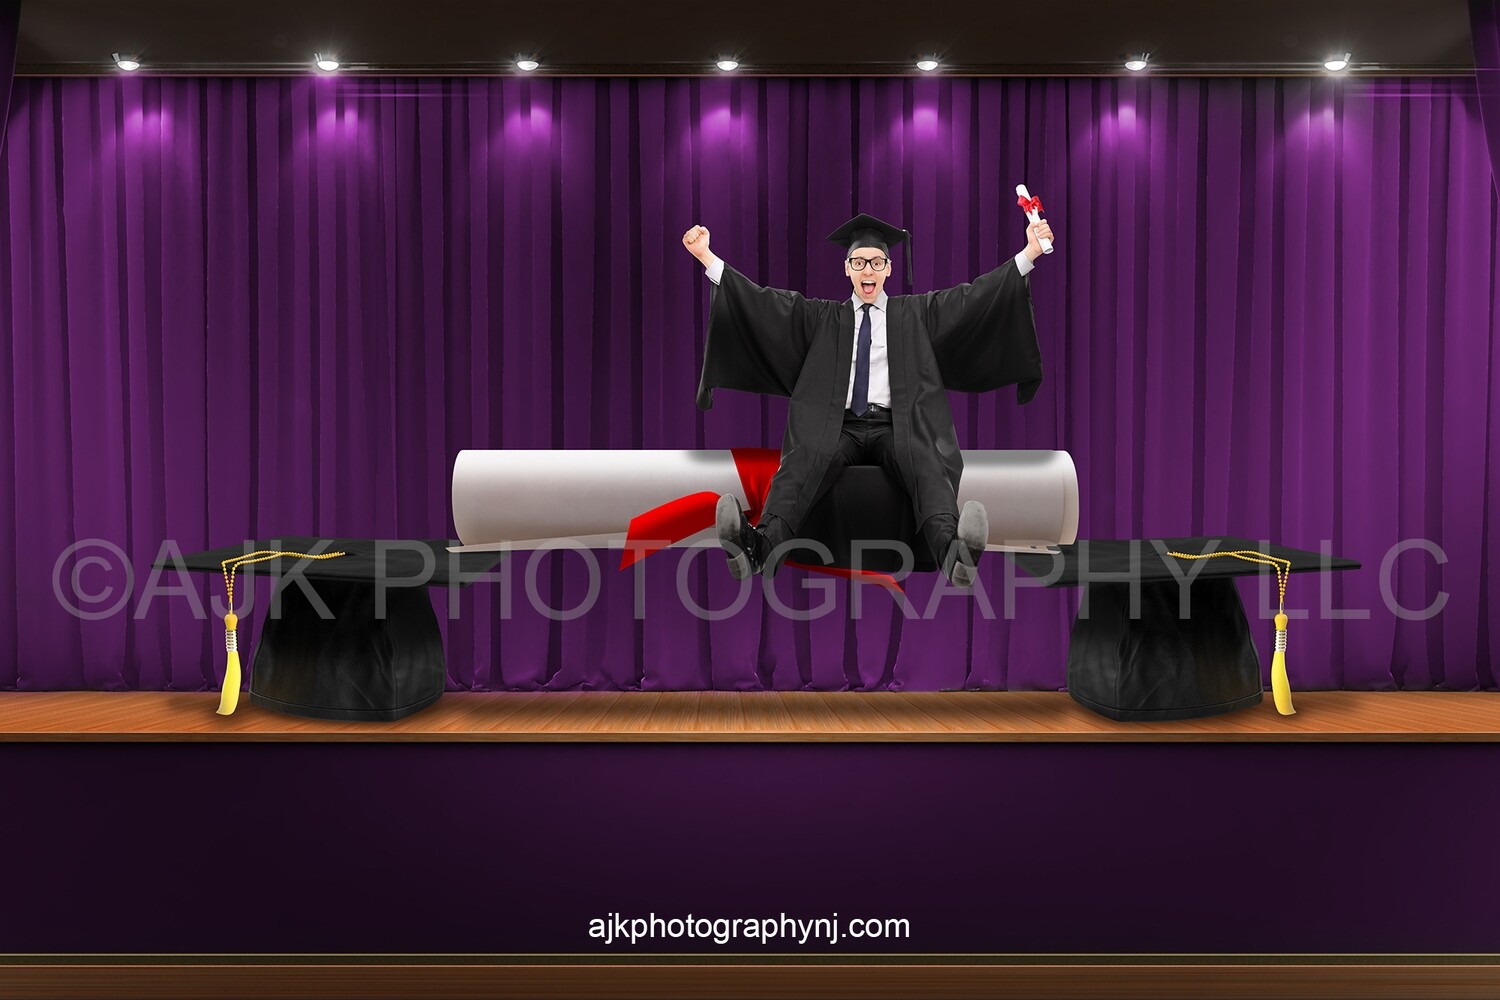 Graduation digital background, giant graduation caps and diploma, stage with purple curtains, school digital backdrop